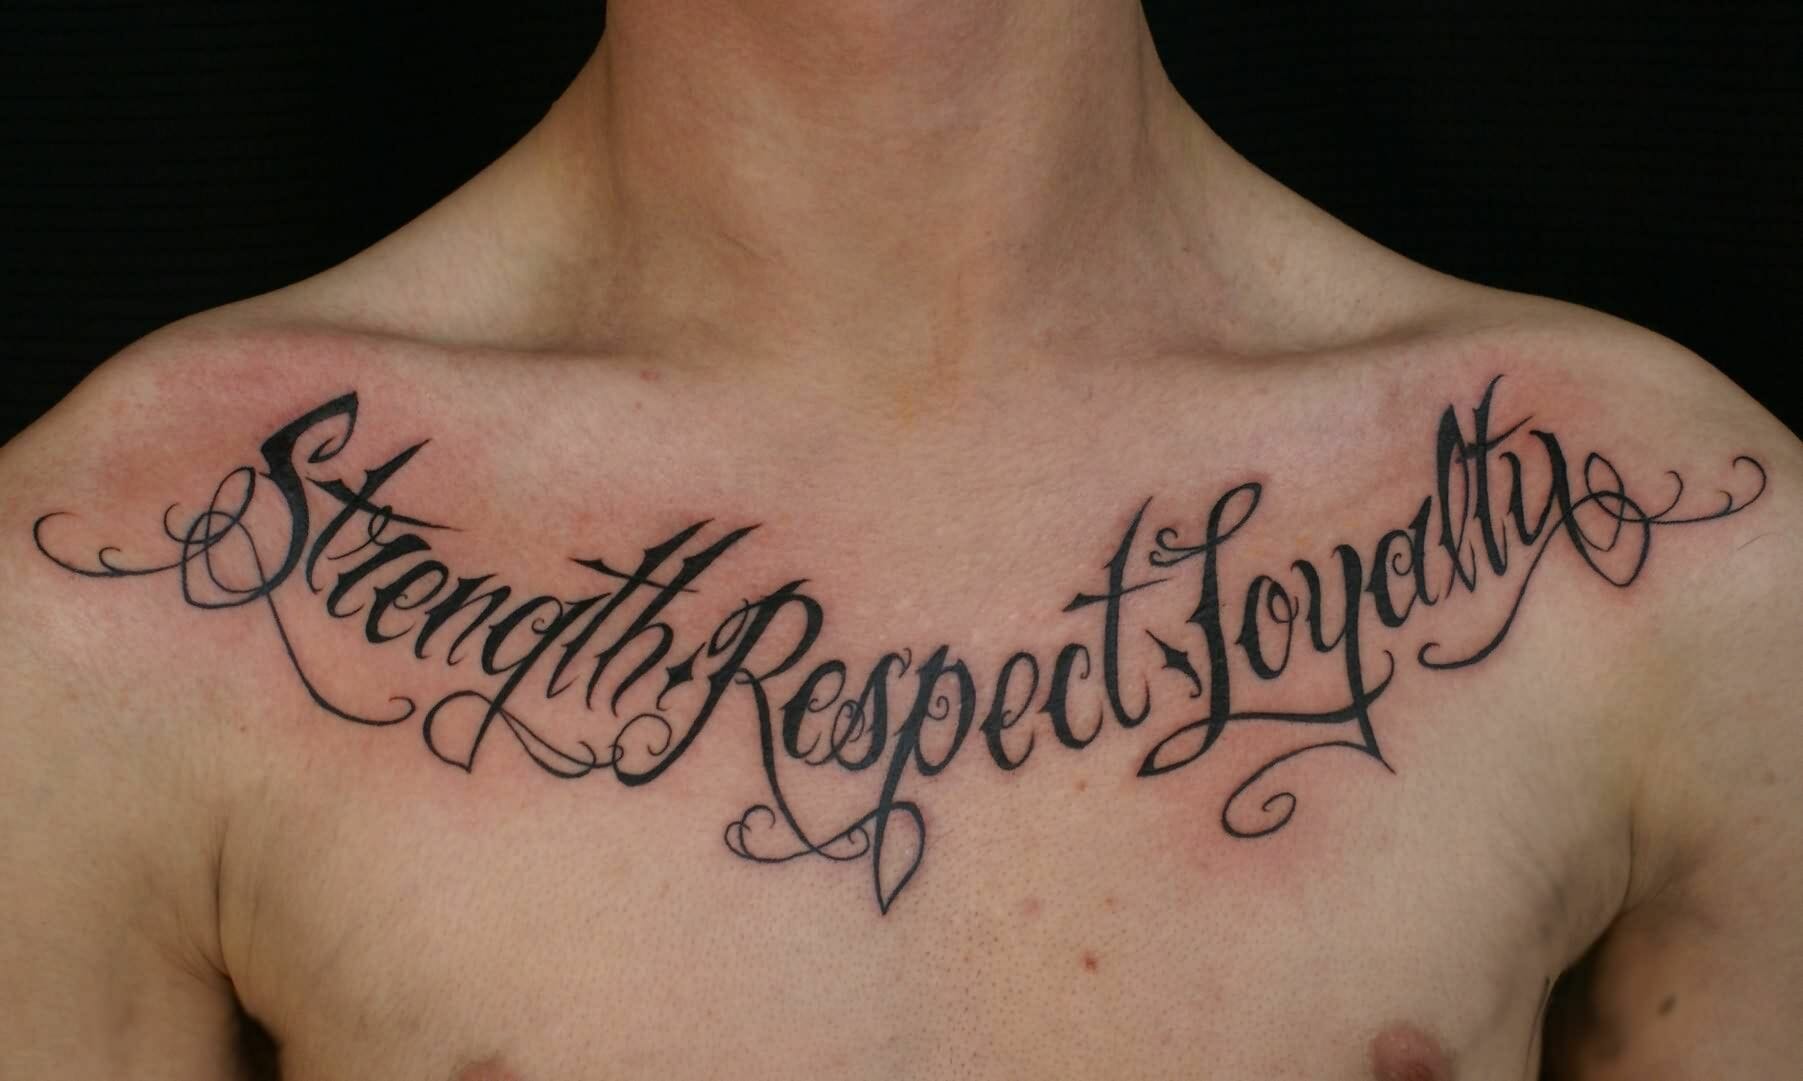 101 Amazing Chest Word Tattoo Ideas That Will Blow Your Mind! - Outsons